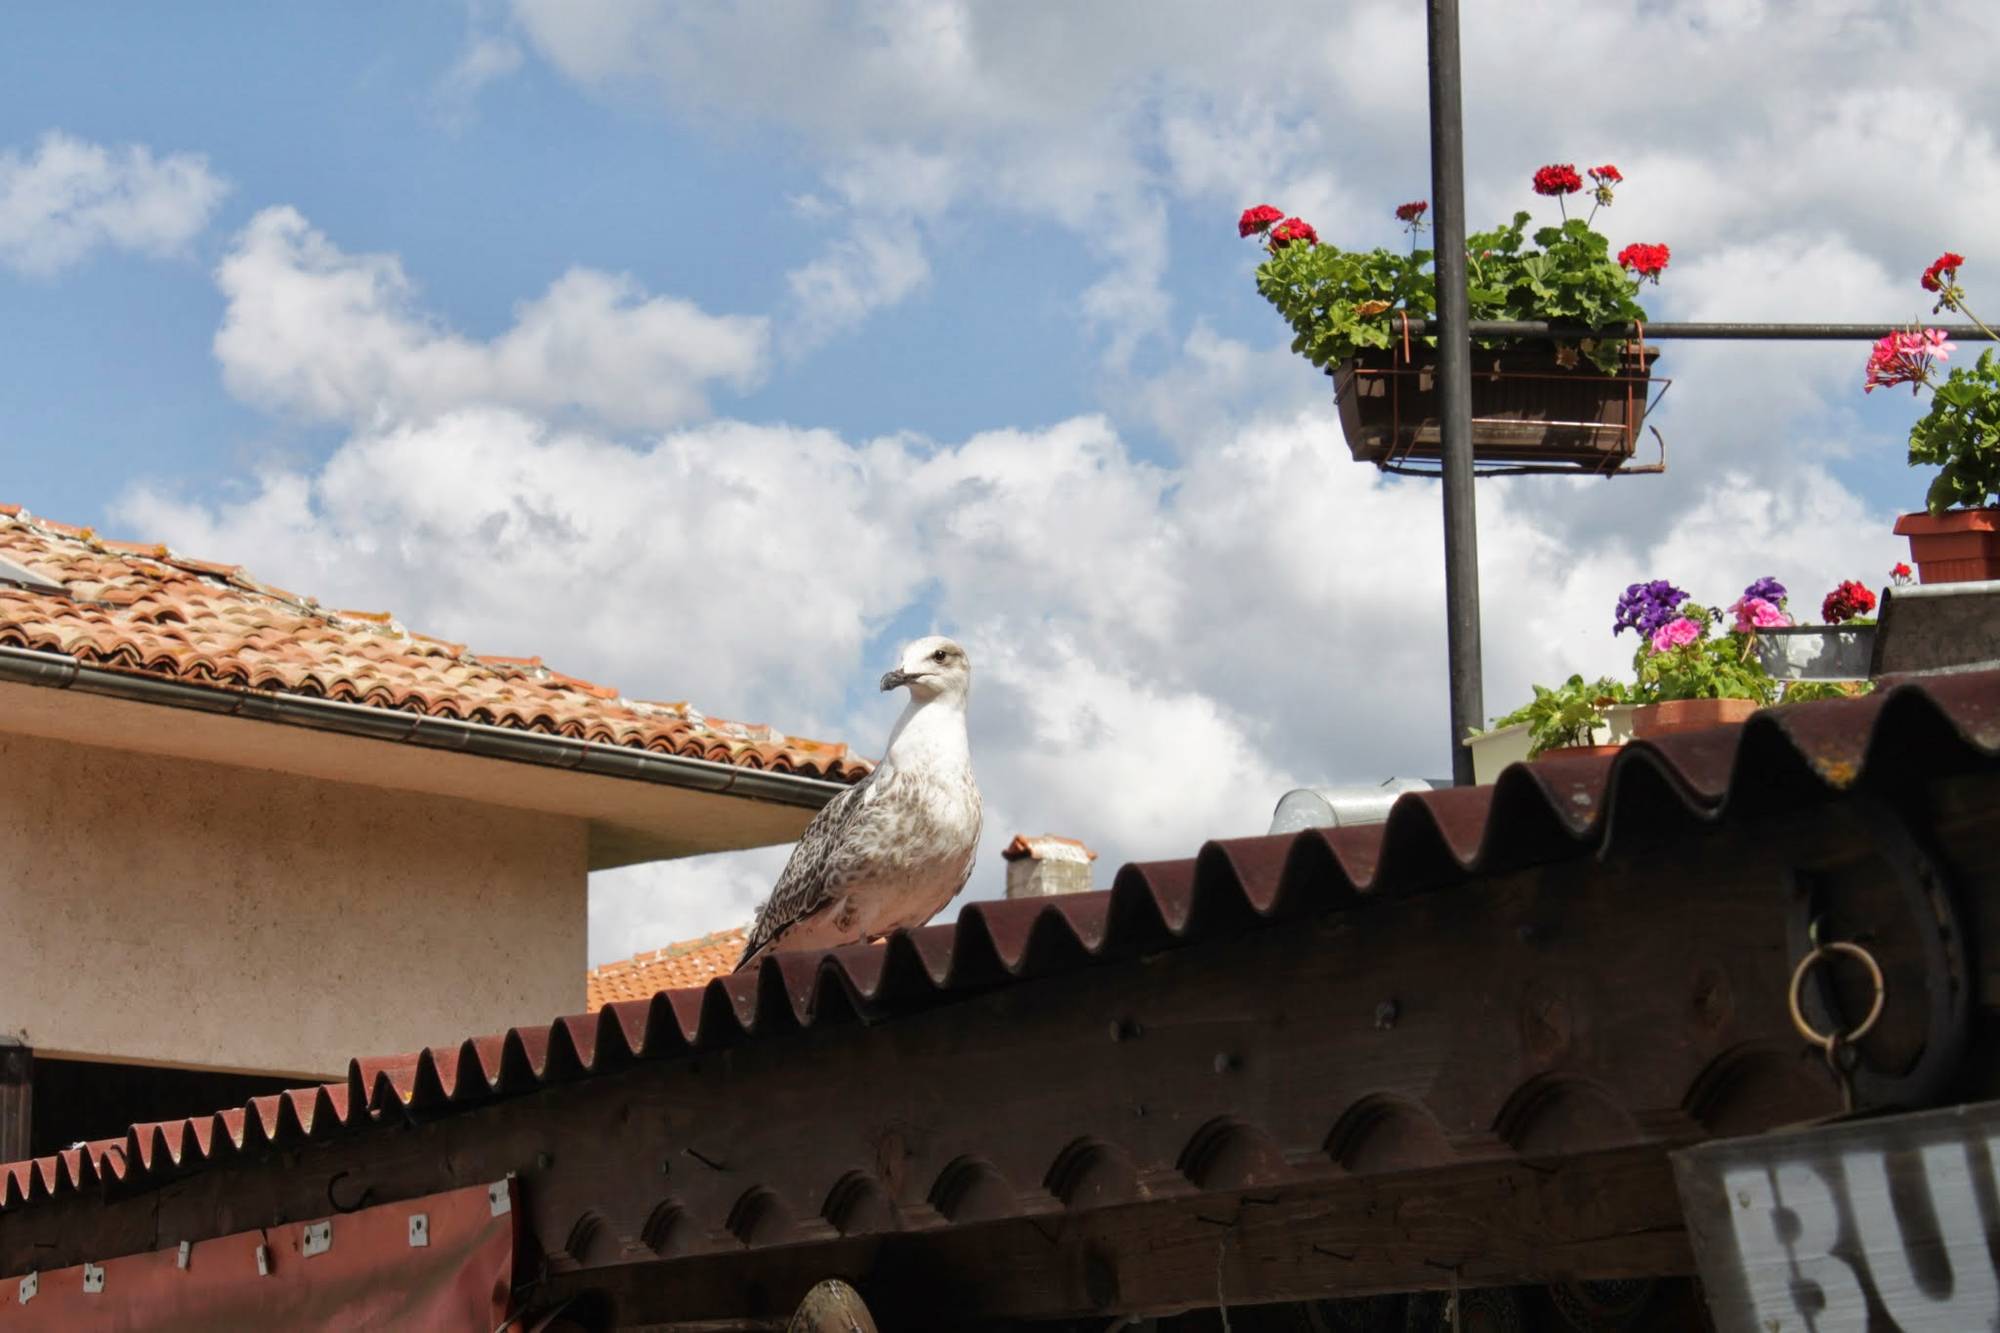 On the roof of the house are flowers and ... a seagull